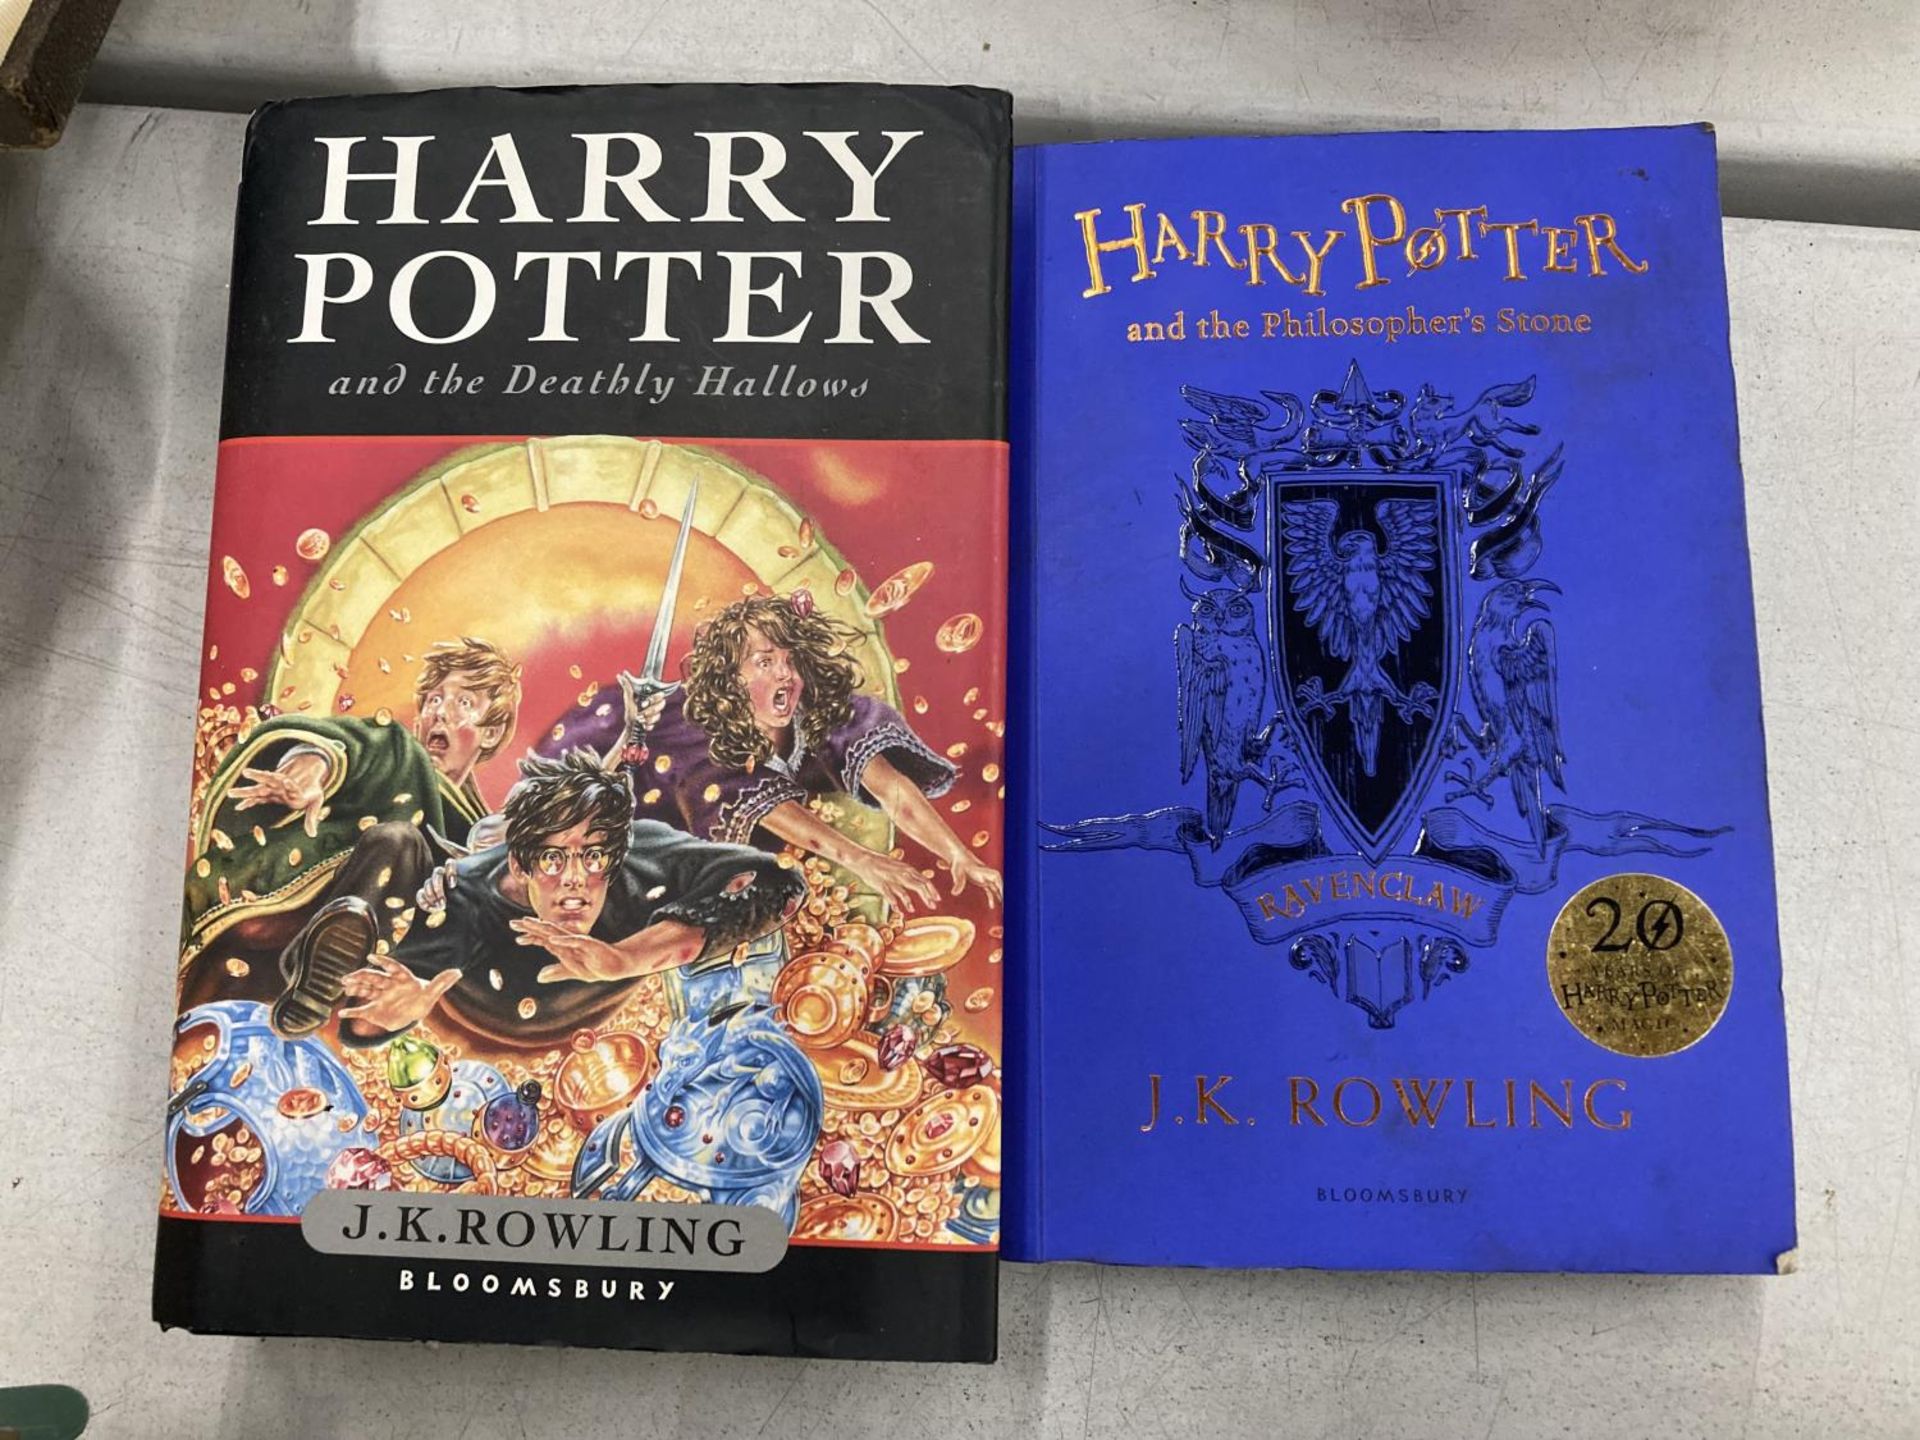 A FIRST EDITION HARDBACK COPY OF HARRY POTTER AND THE DEATHLY HALLOWS PLUS HARRY POTTER AND THE